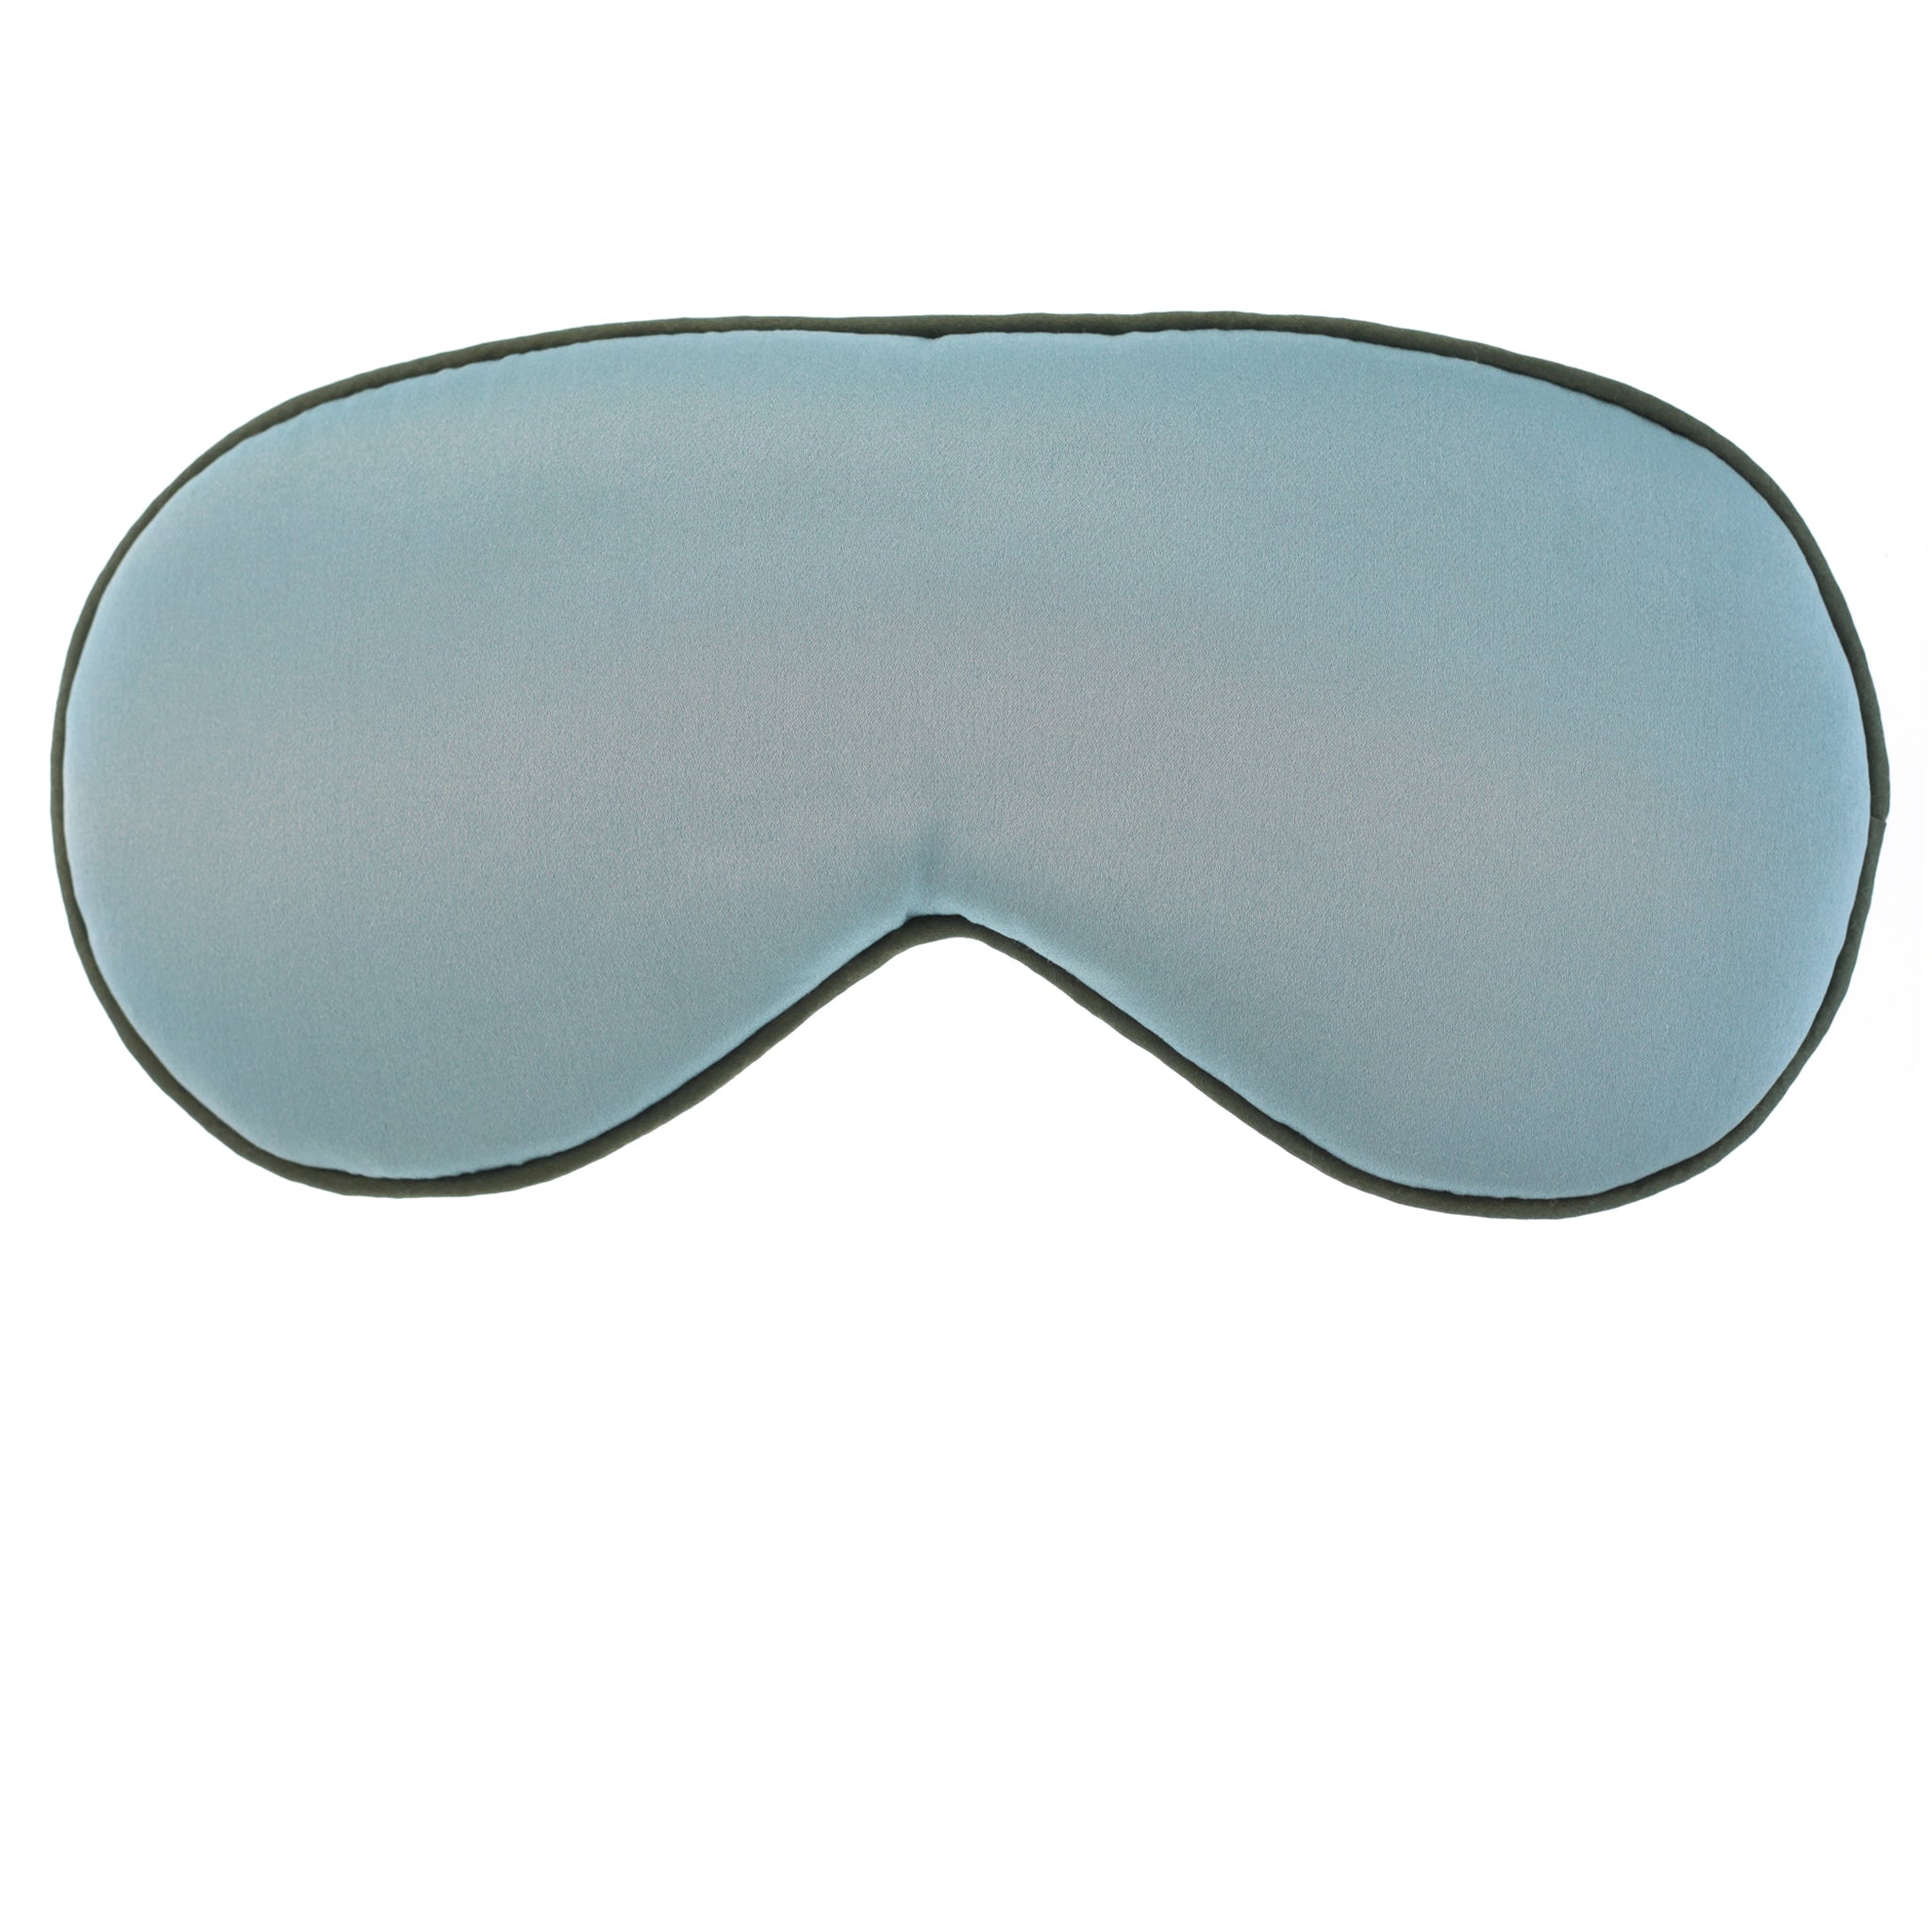 Hypnos Sleep Mask in French Blue Silk Charmeuse with Forest Green Trim